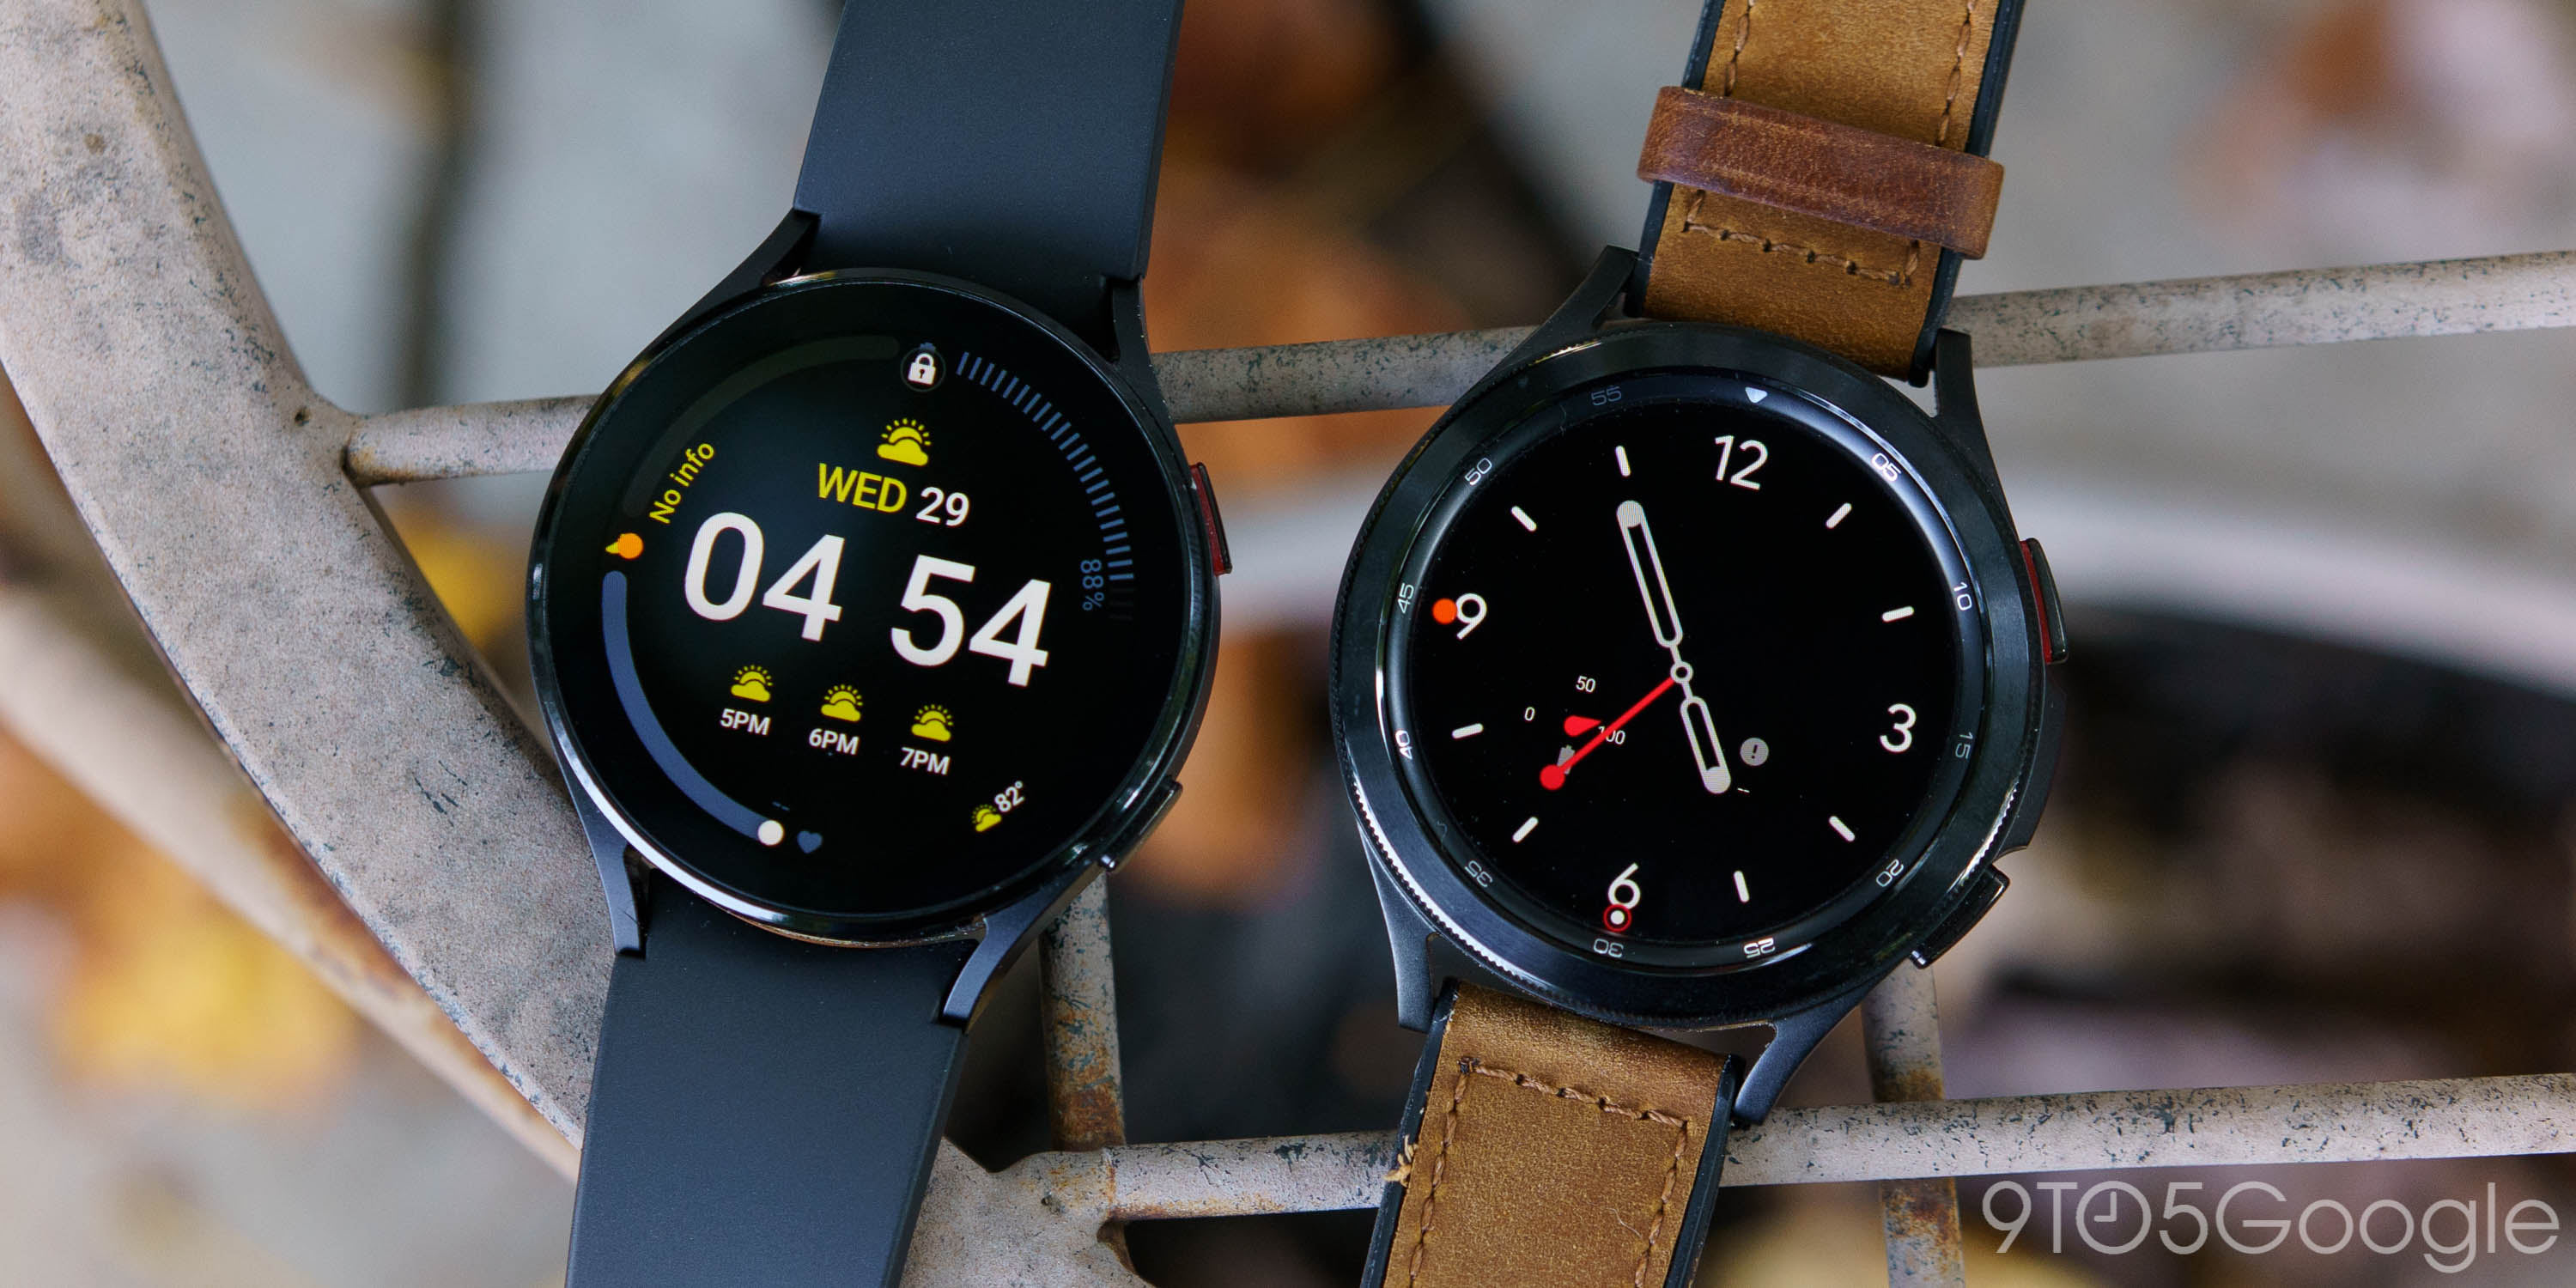 Samsung Galaxy Watch 4 review: The return of Wear OS